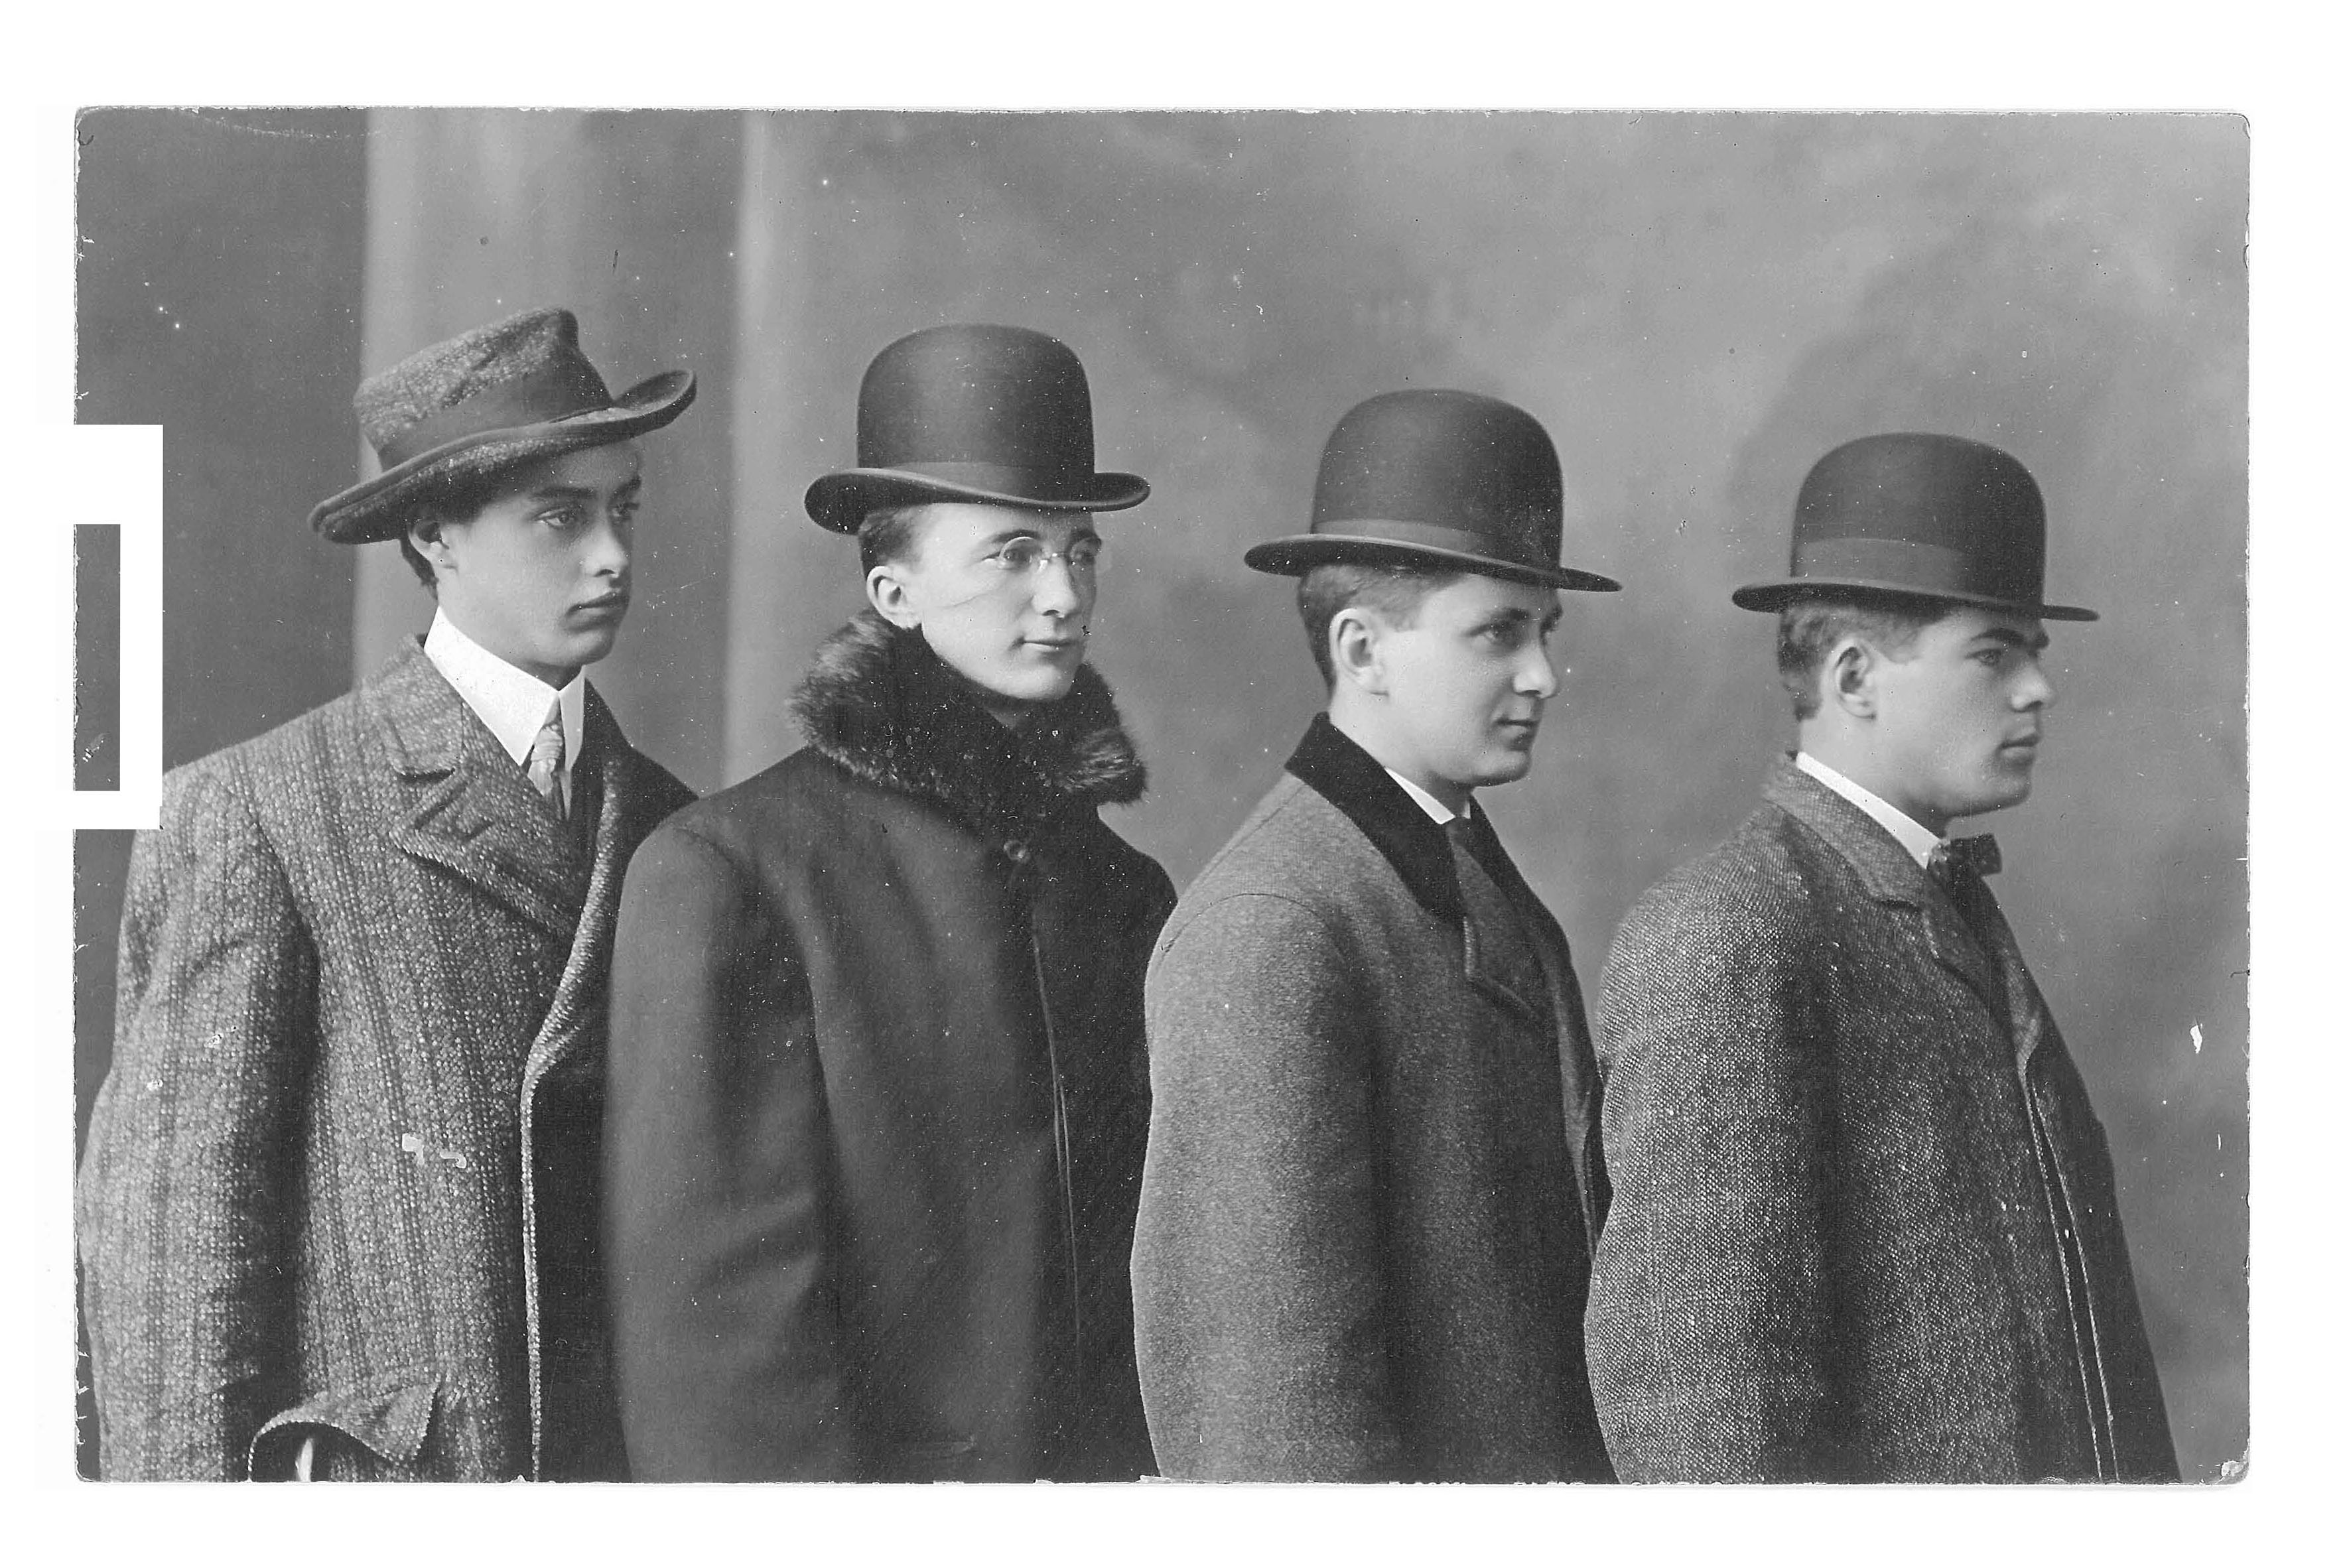 Thoughts on a photograph of four men wearing hats